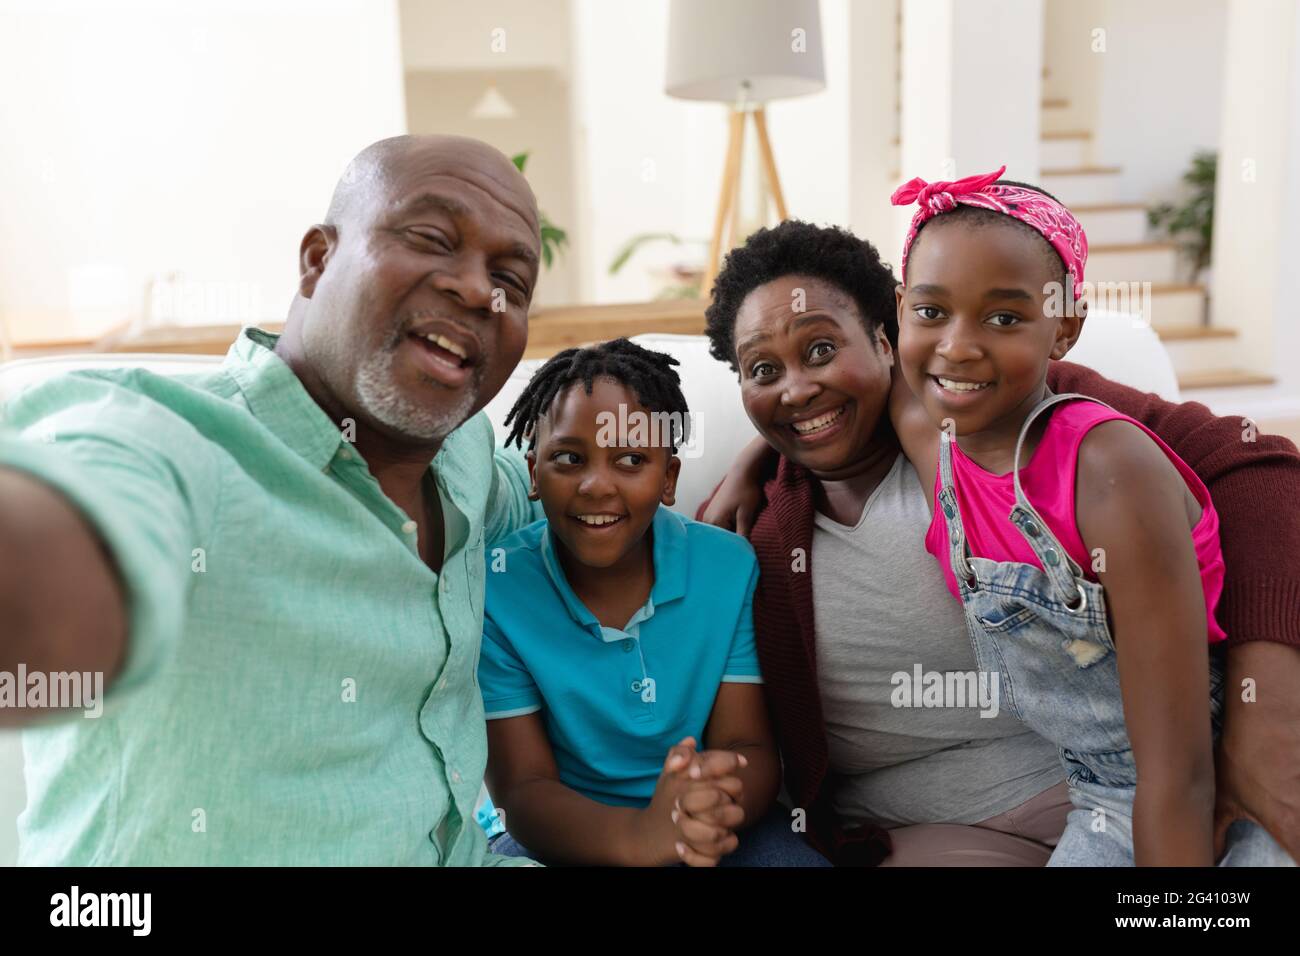 African american grandfather and grandmother on couch smiling with grandchildren taking selfie Stock Photo